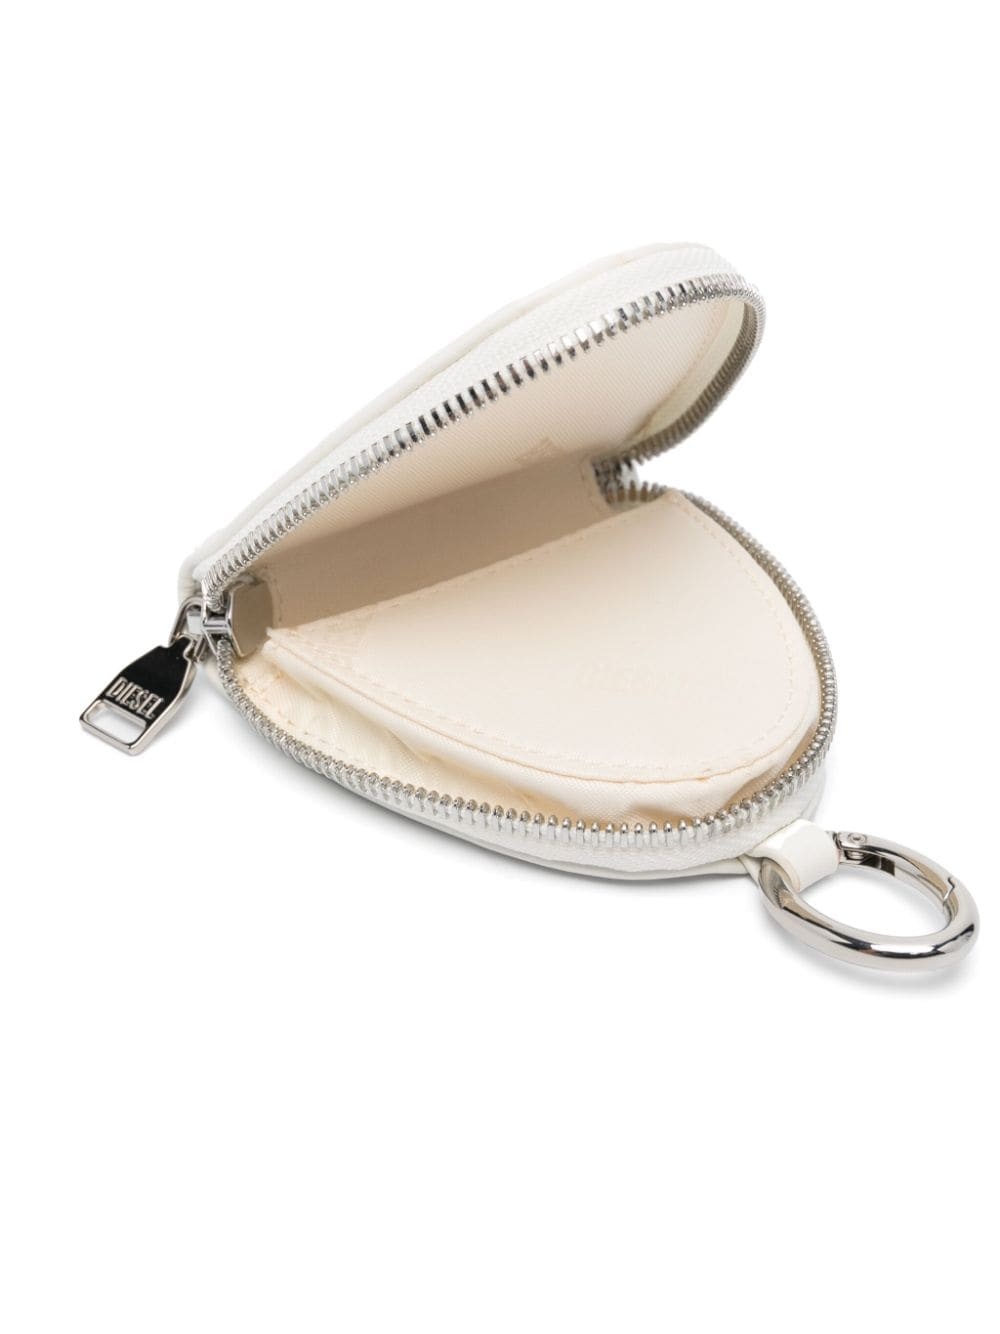 1dr-Fold leather coin purse - 3